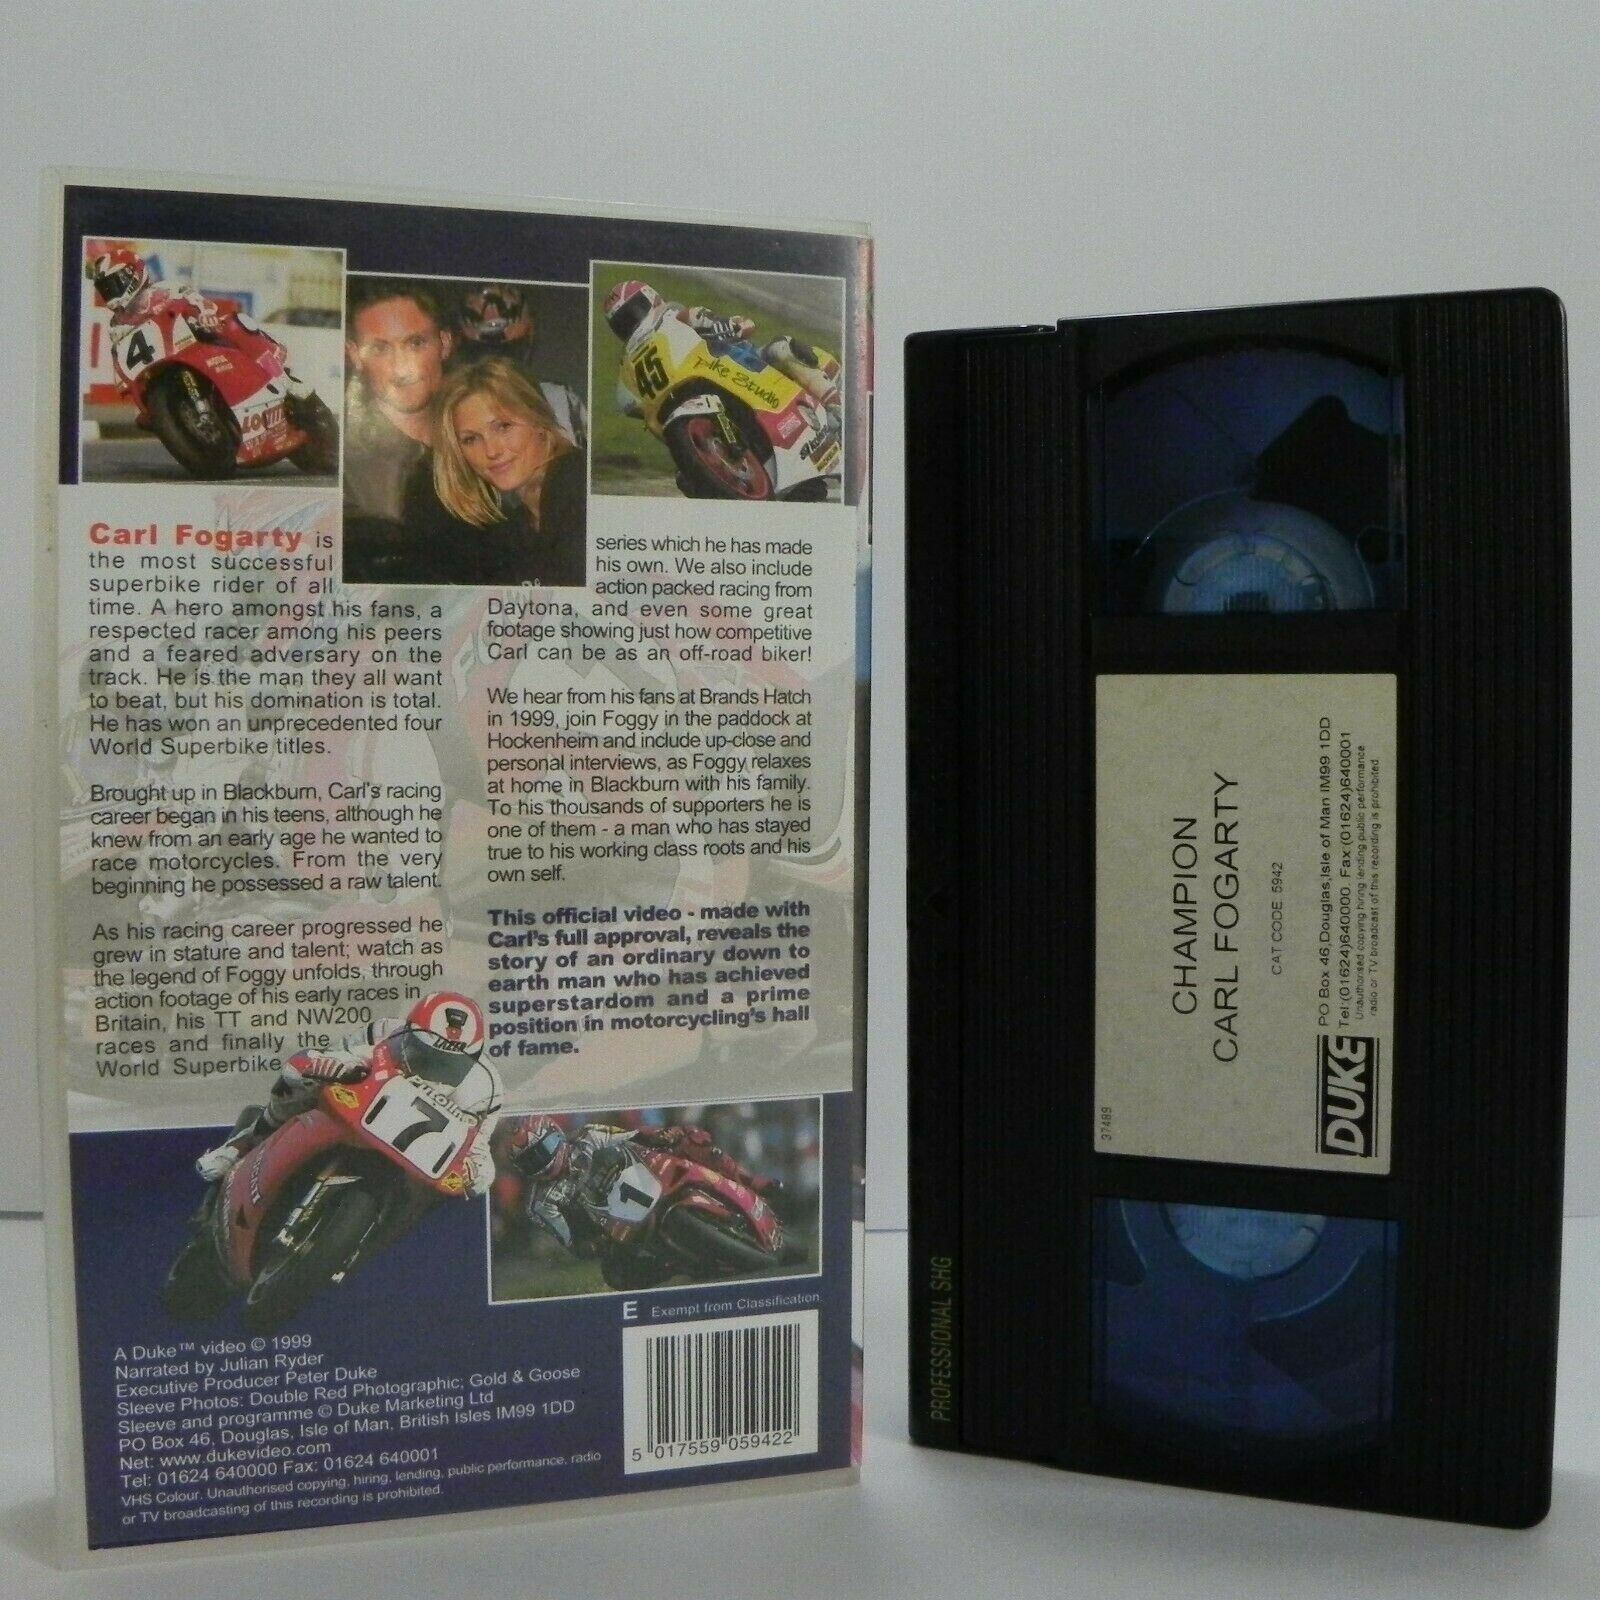 Carl Fogarty: Champion - The Full And Official Story - Superbike Rider - Pal VHS-